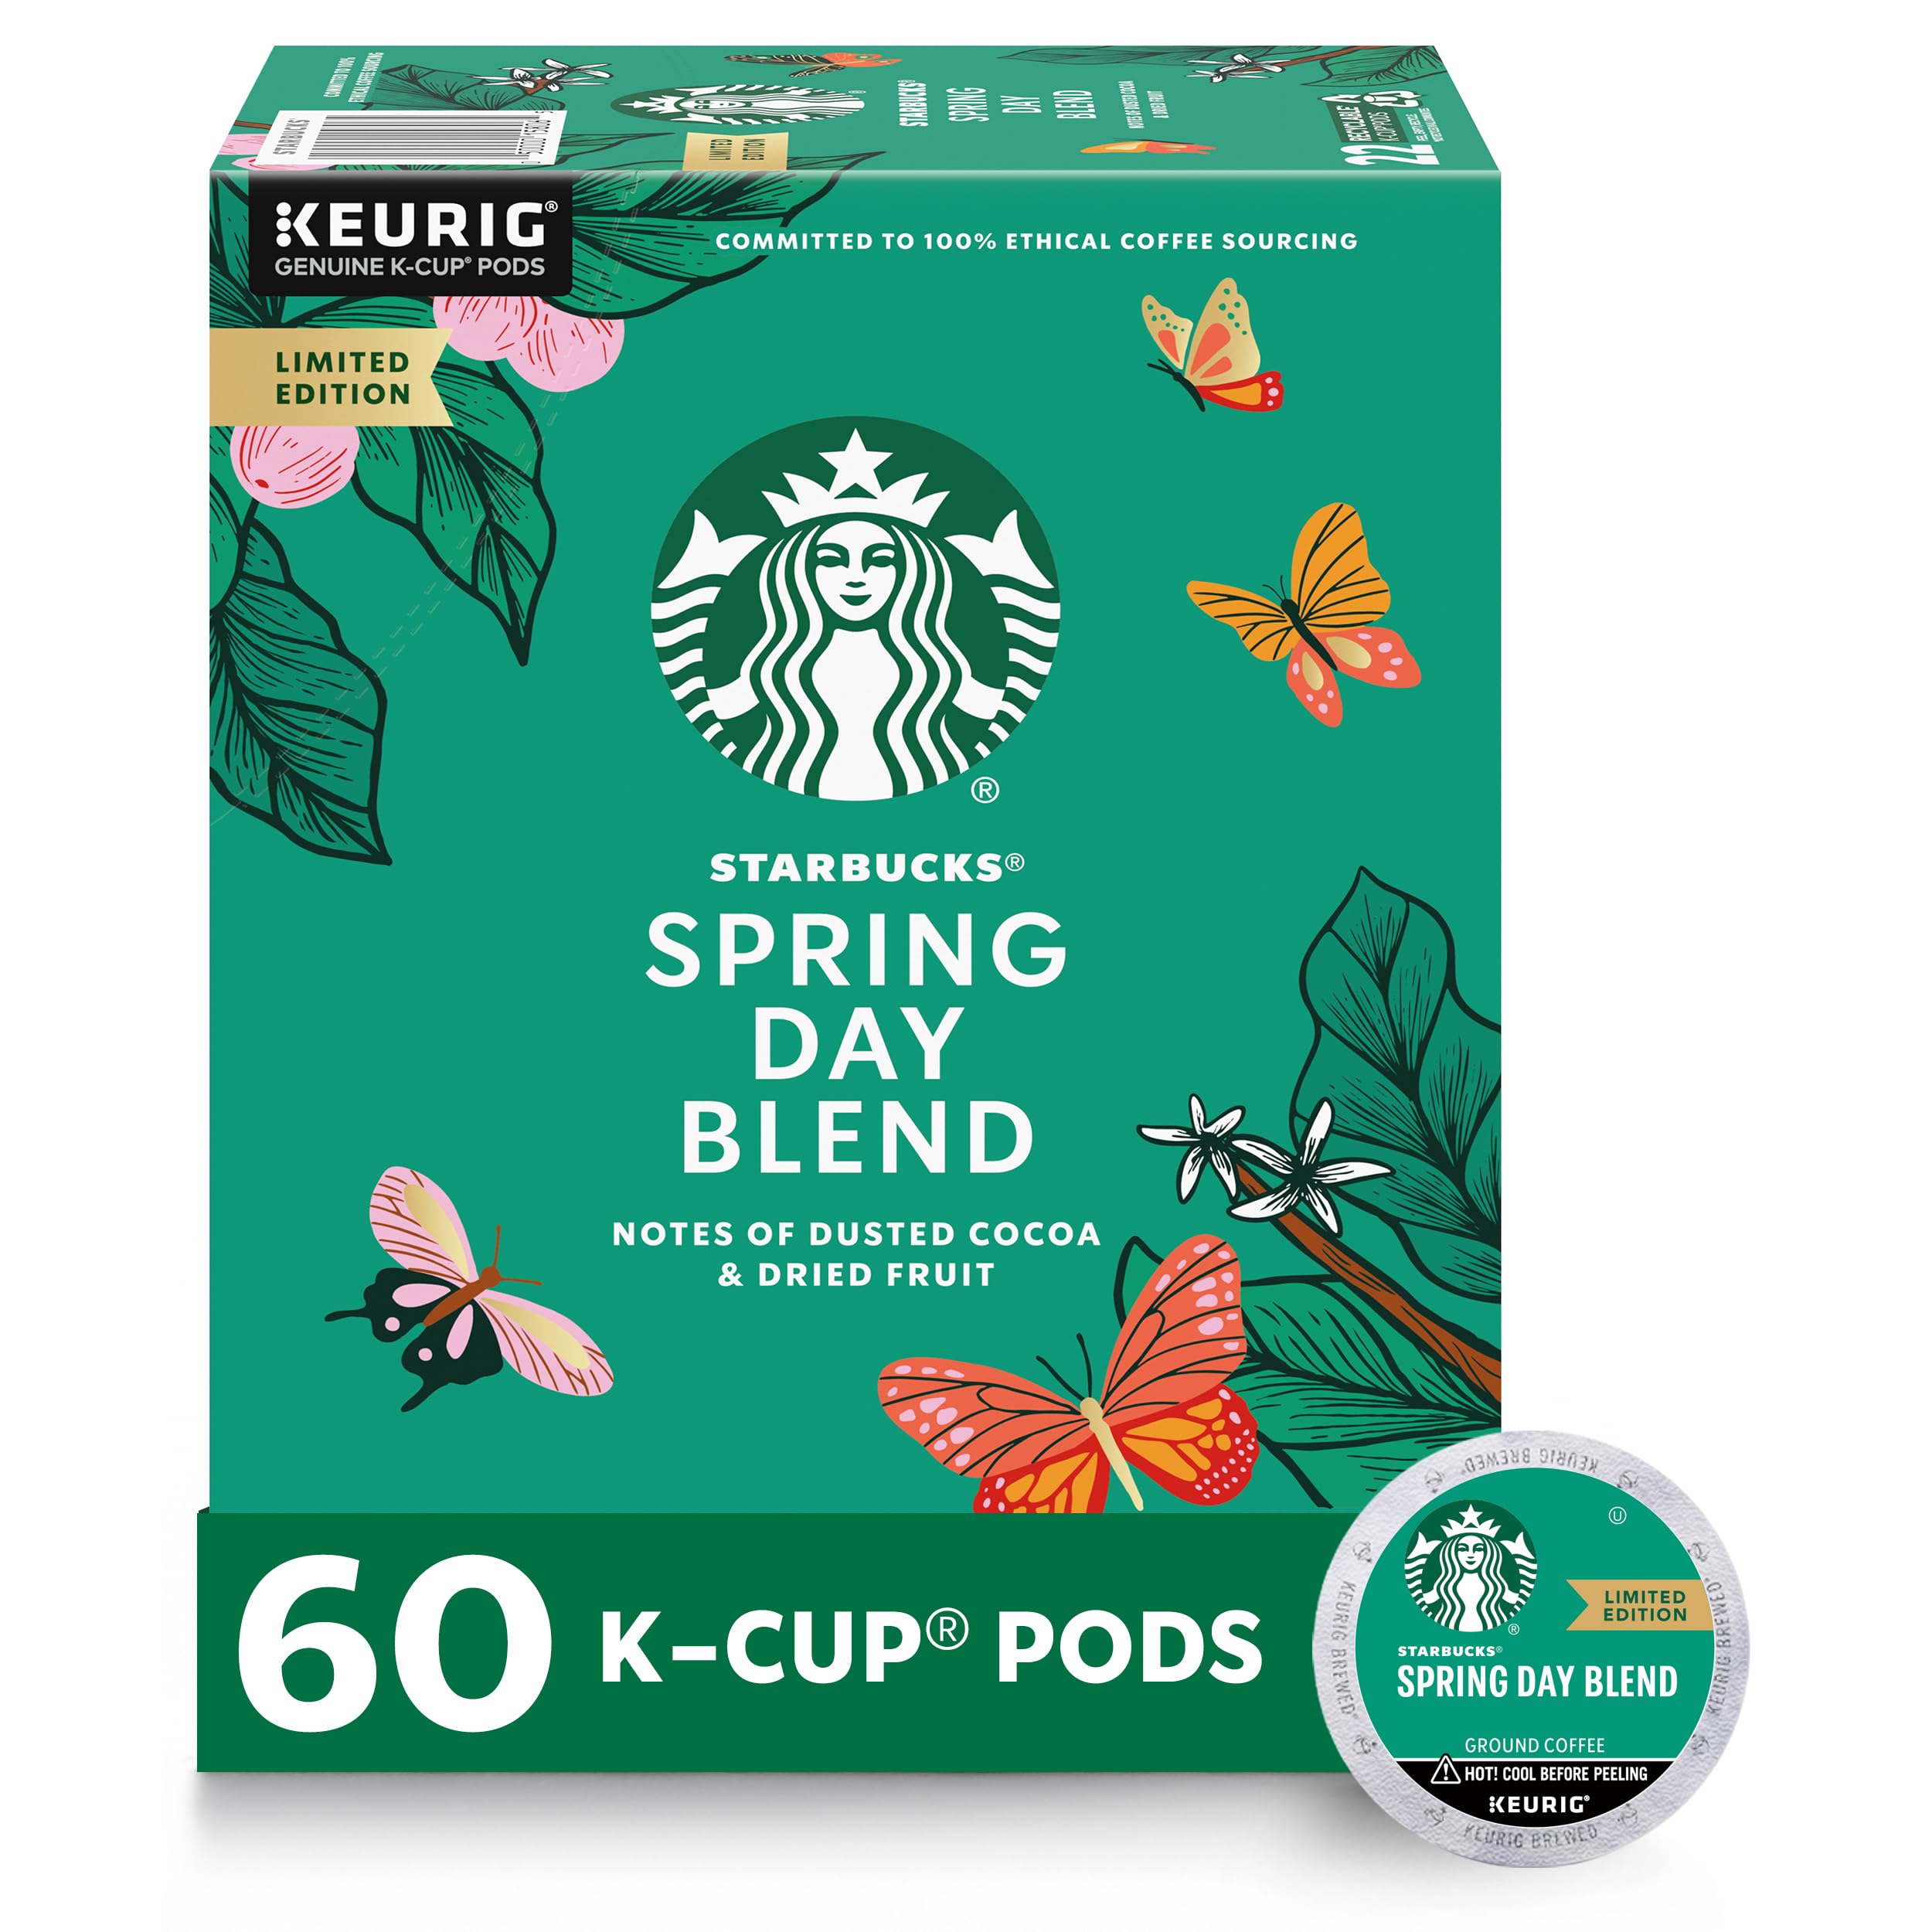 Starbucks K-Cup Coffee Pods, Medium Roast Coffee, Spring Day Blend For Keurig Coffee Makers, 100% Arabica, Limited Edition, 6 Boxes (60 Pods Total)